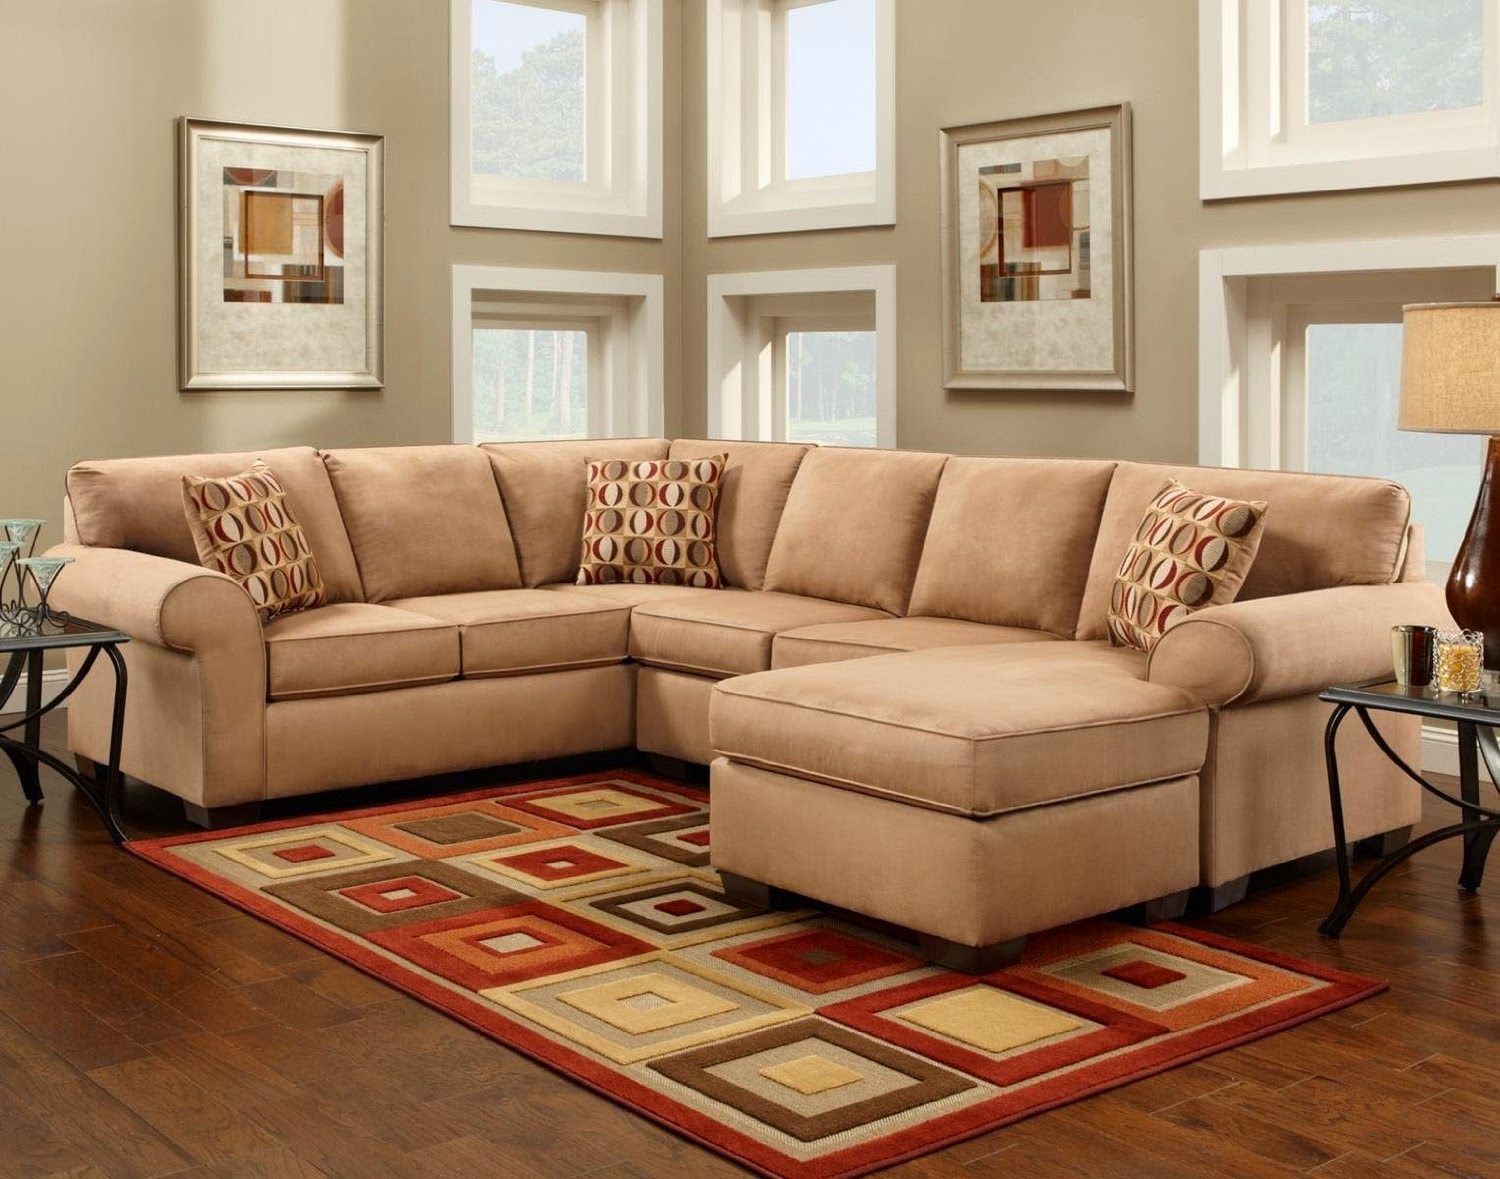 3 Popular Main Colors In Microfiber Sectional Sleeper Sofa With Microfiber Sectional Corner Sofas (View 12 of 20)